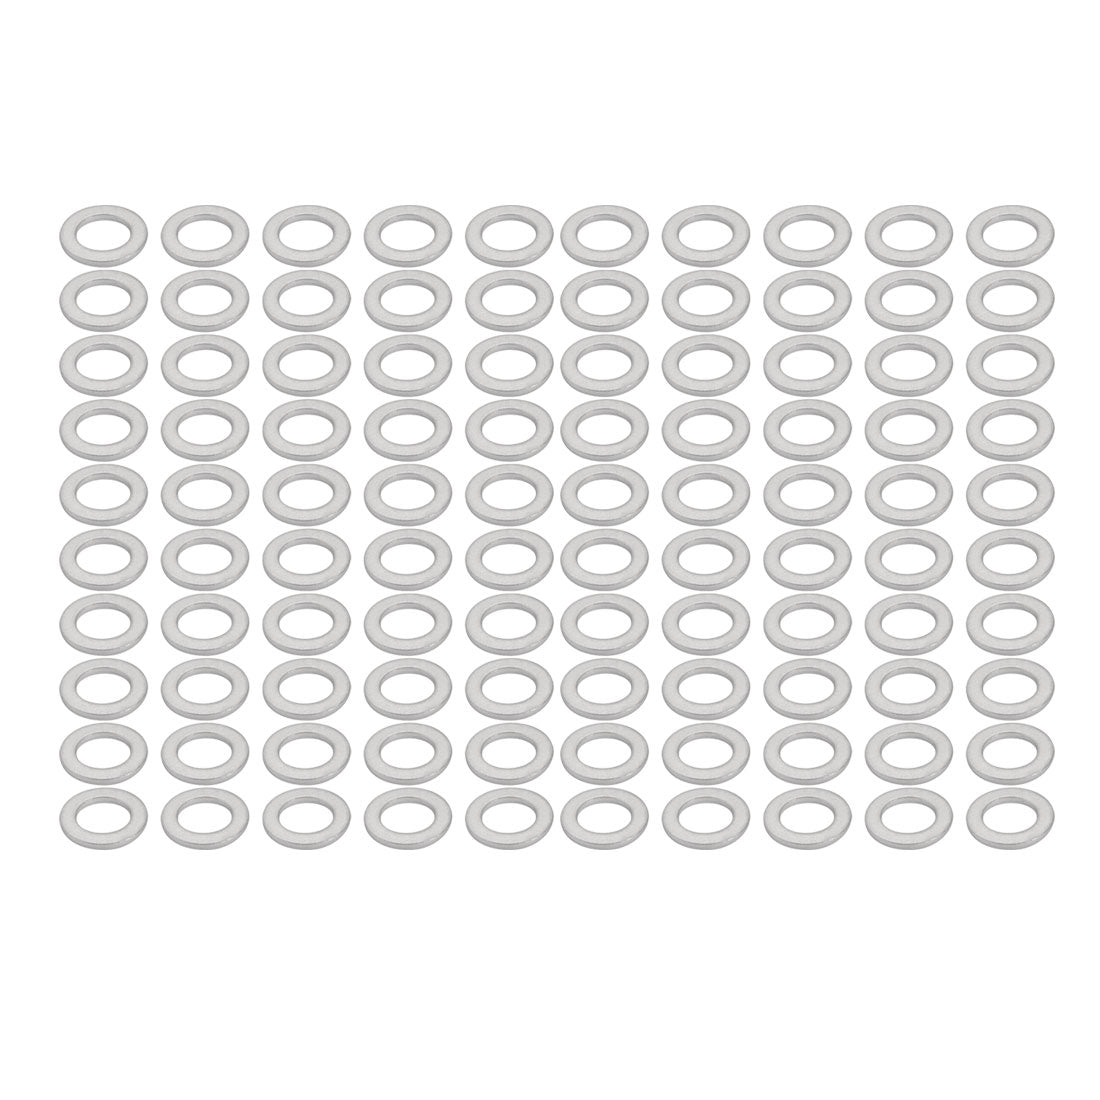 uxcell Uxcell 100Pcs 12mmx20mmx2mm Aluminum Motorcycle Hardware Drain Plug Washer